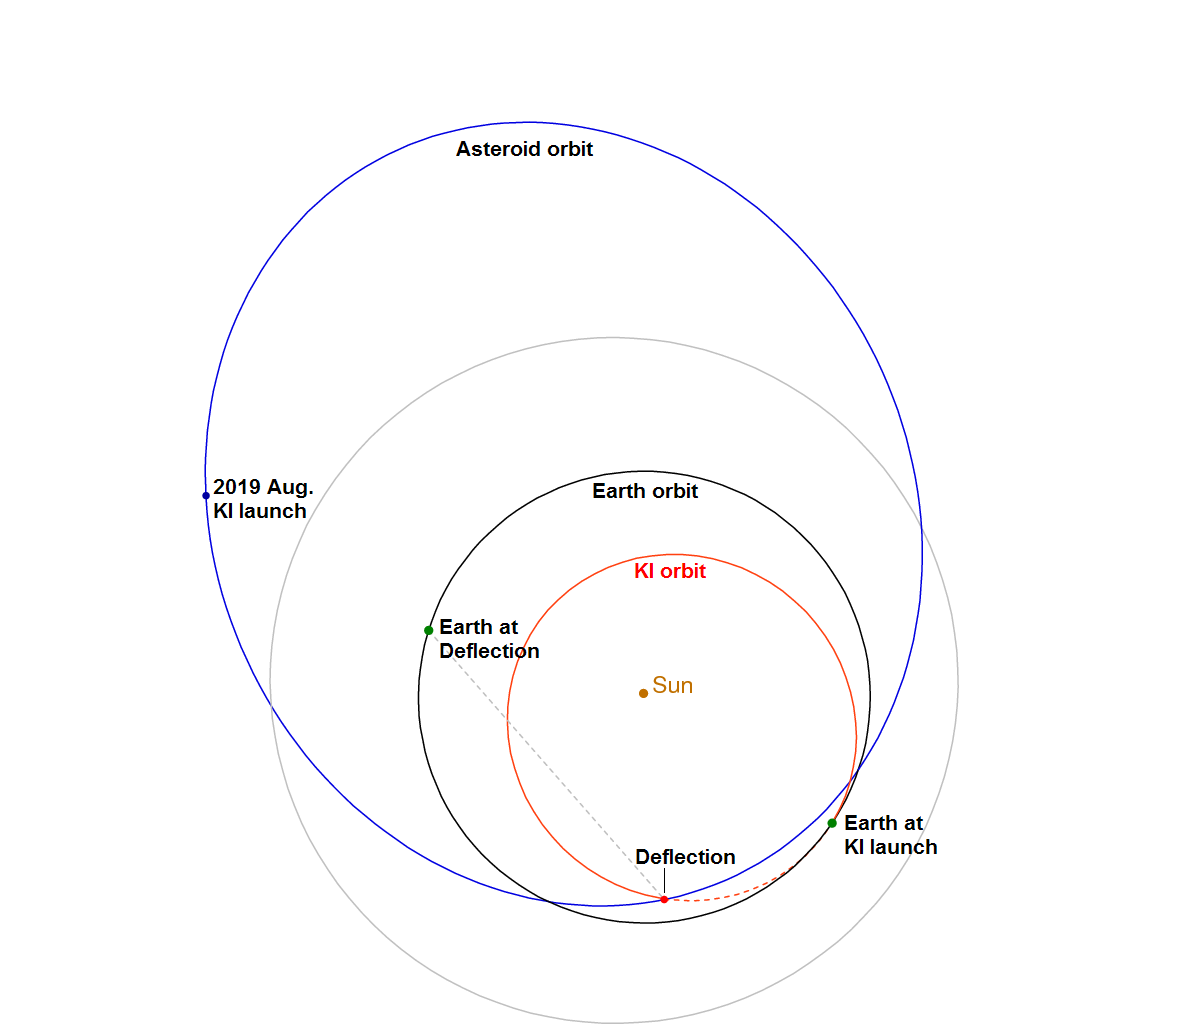 This diagram shows the trajectory followed by all of the six Kinetic Impactor (KI) deflection missions (in red), along with the orbits of the asteroid (blue) and the Earth (black). The launches occur during the 10-day period from Aug. 12 through Aug. 22. The Kinetic Impactors arrive at the asteroid and deliver their respective deflections during the 7-day period from Feb. 28, 2020 through Mar. 6, 2020. The asteroid will be only 30 degrees from the Sun at the time of deflection.